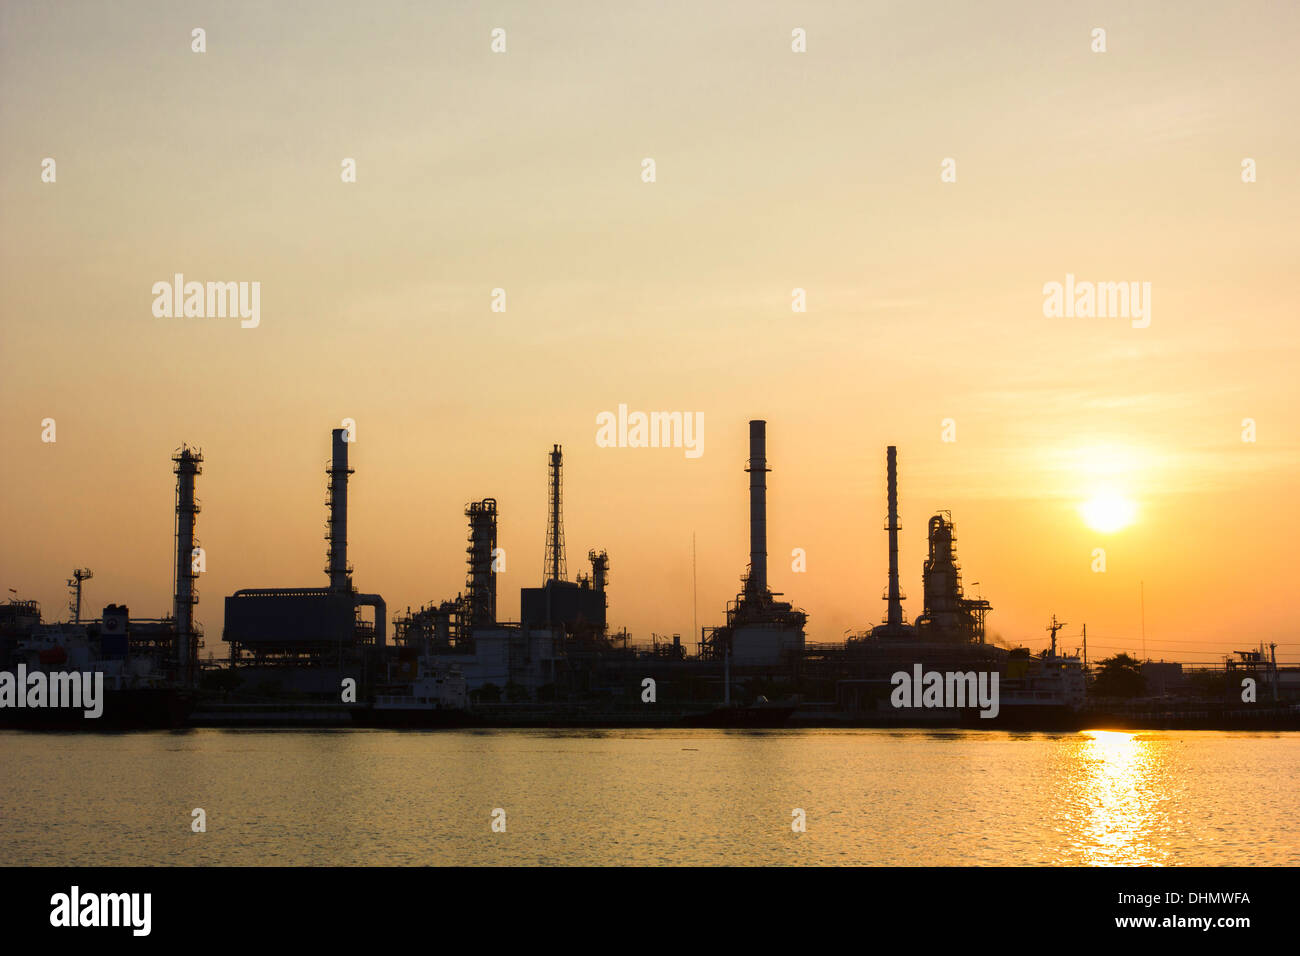 Oil refinery view with Sunrise Stock Photo